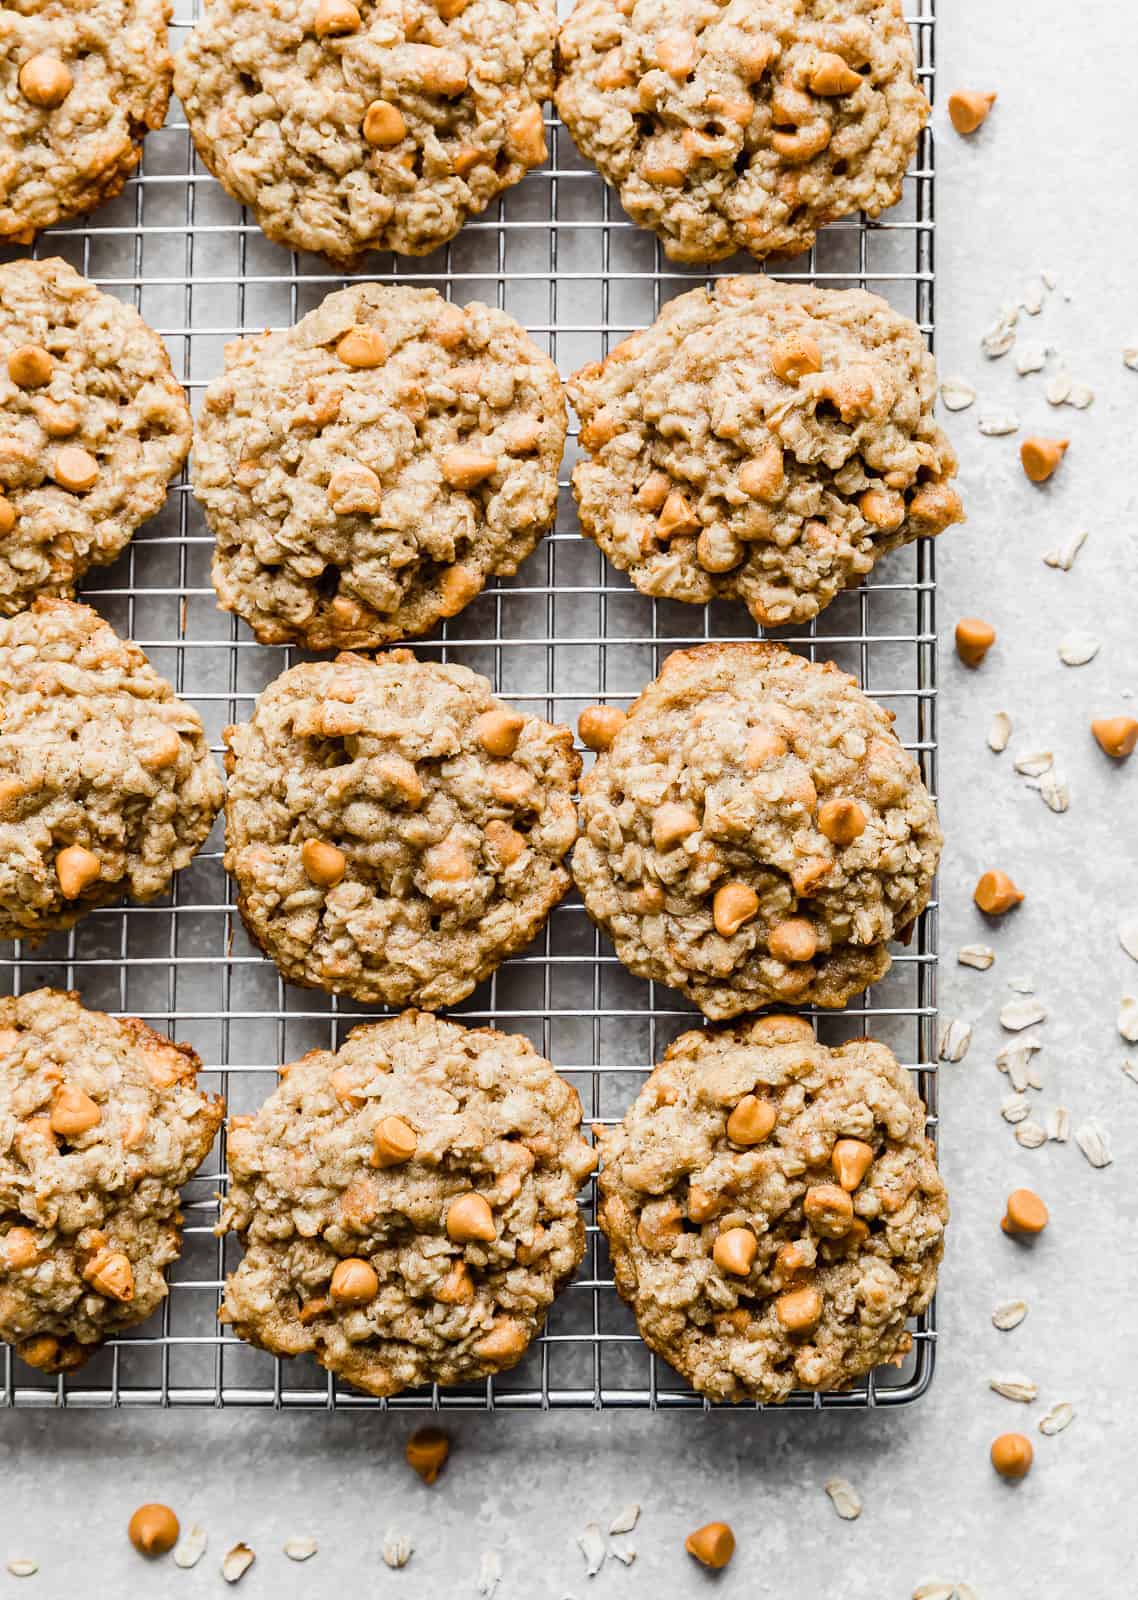 Oatmeal Butterscotch Cookies on a wire cooling rack, against a white background.